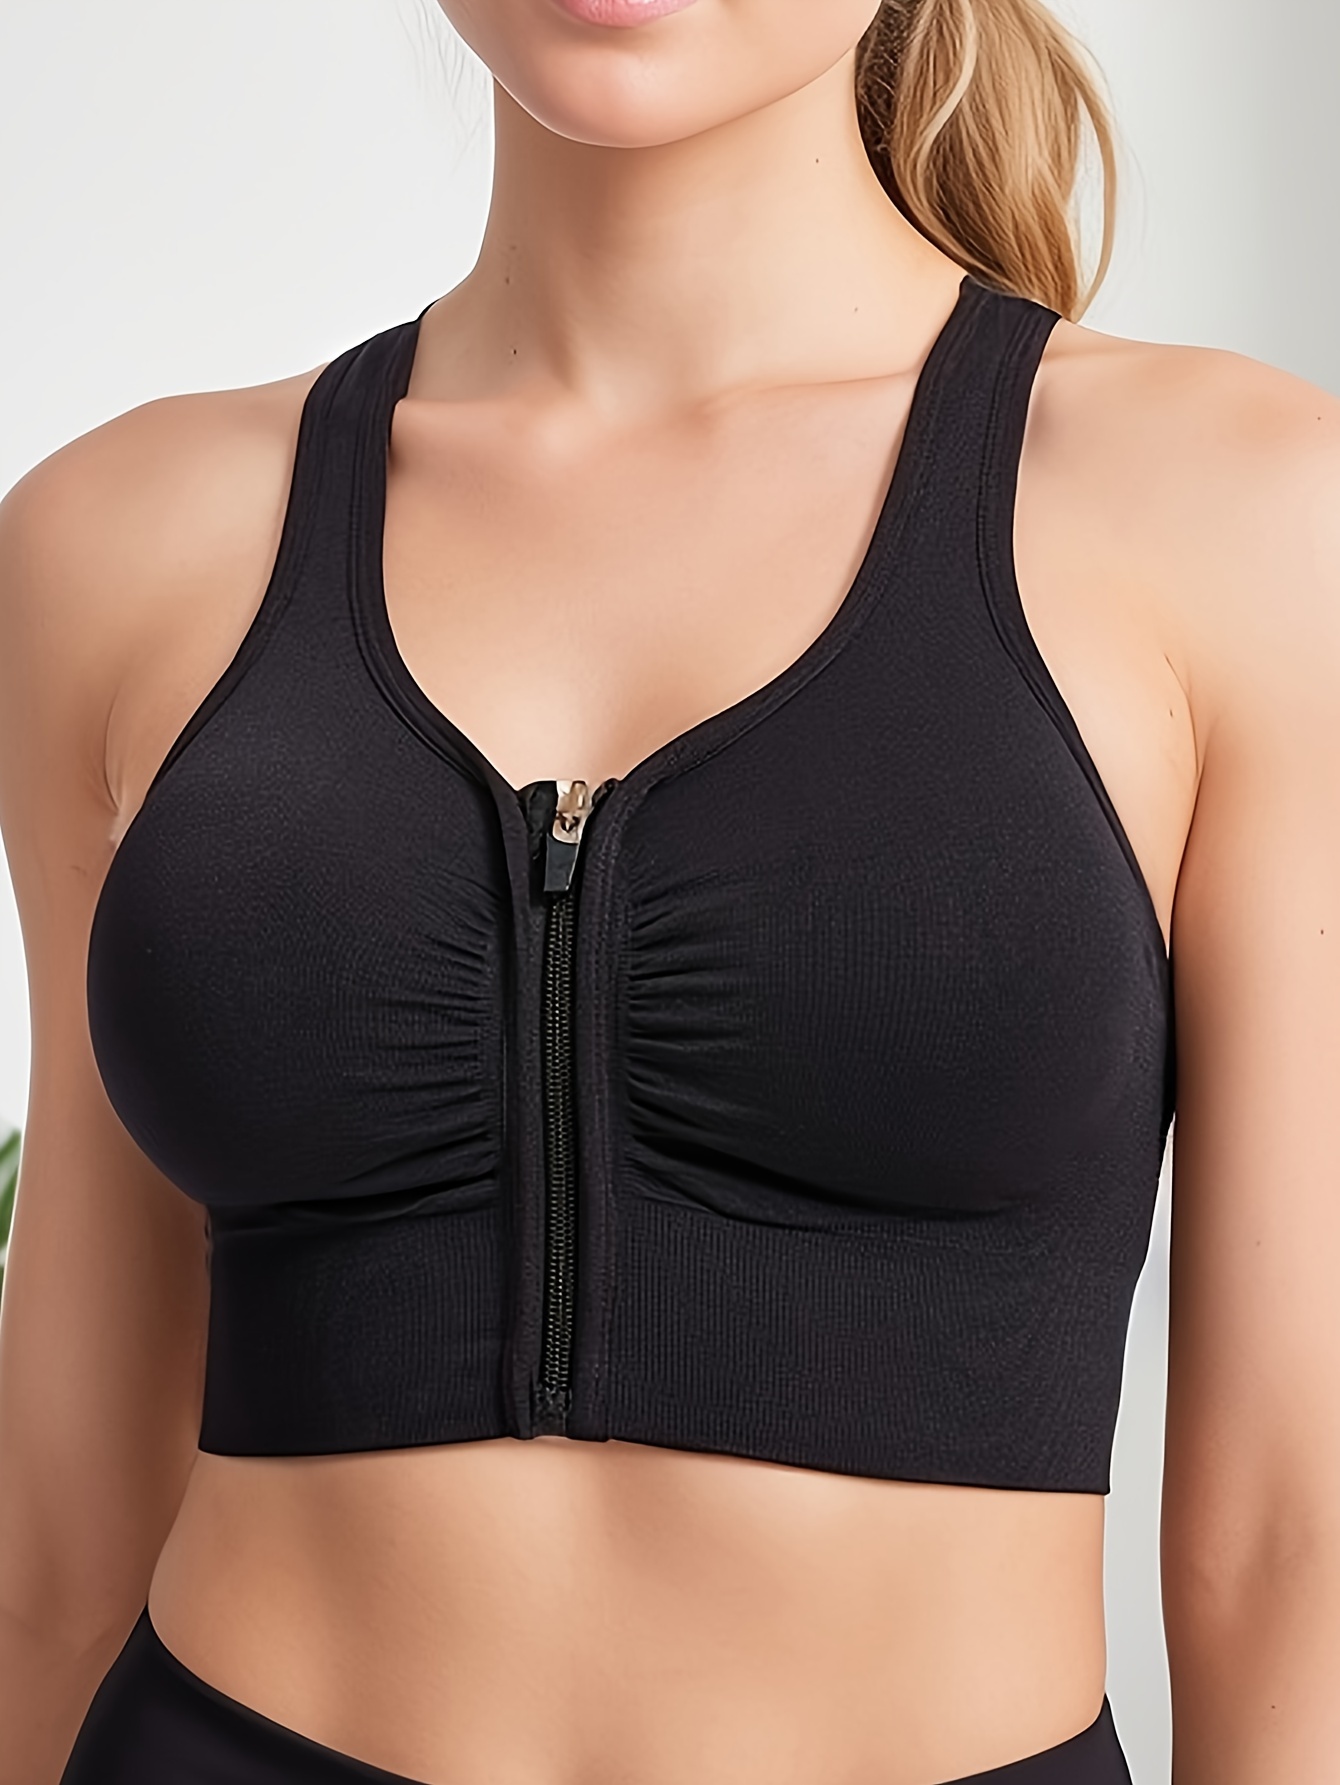  Woman Bras with String Shockproof Running Fitness Underwear  Yoga Sports Bras for Women Long Black : Clothing, Shoes & Jewelry